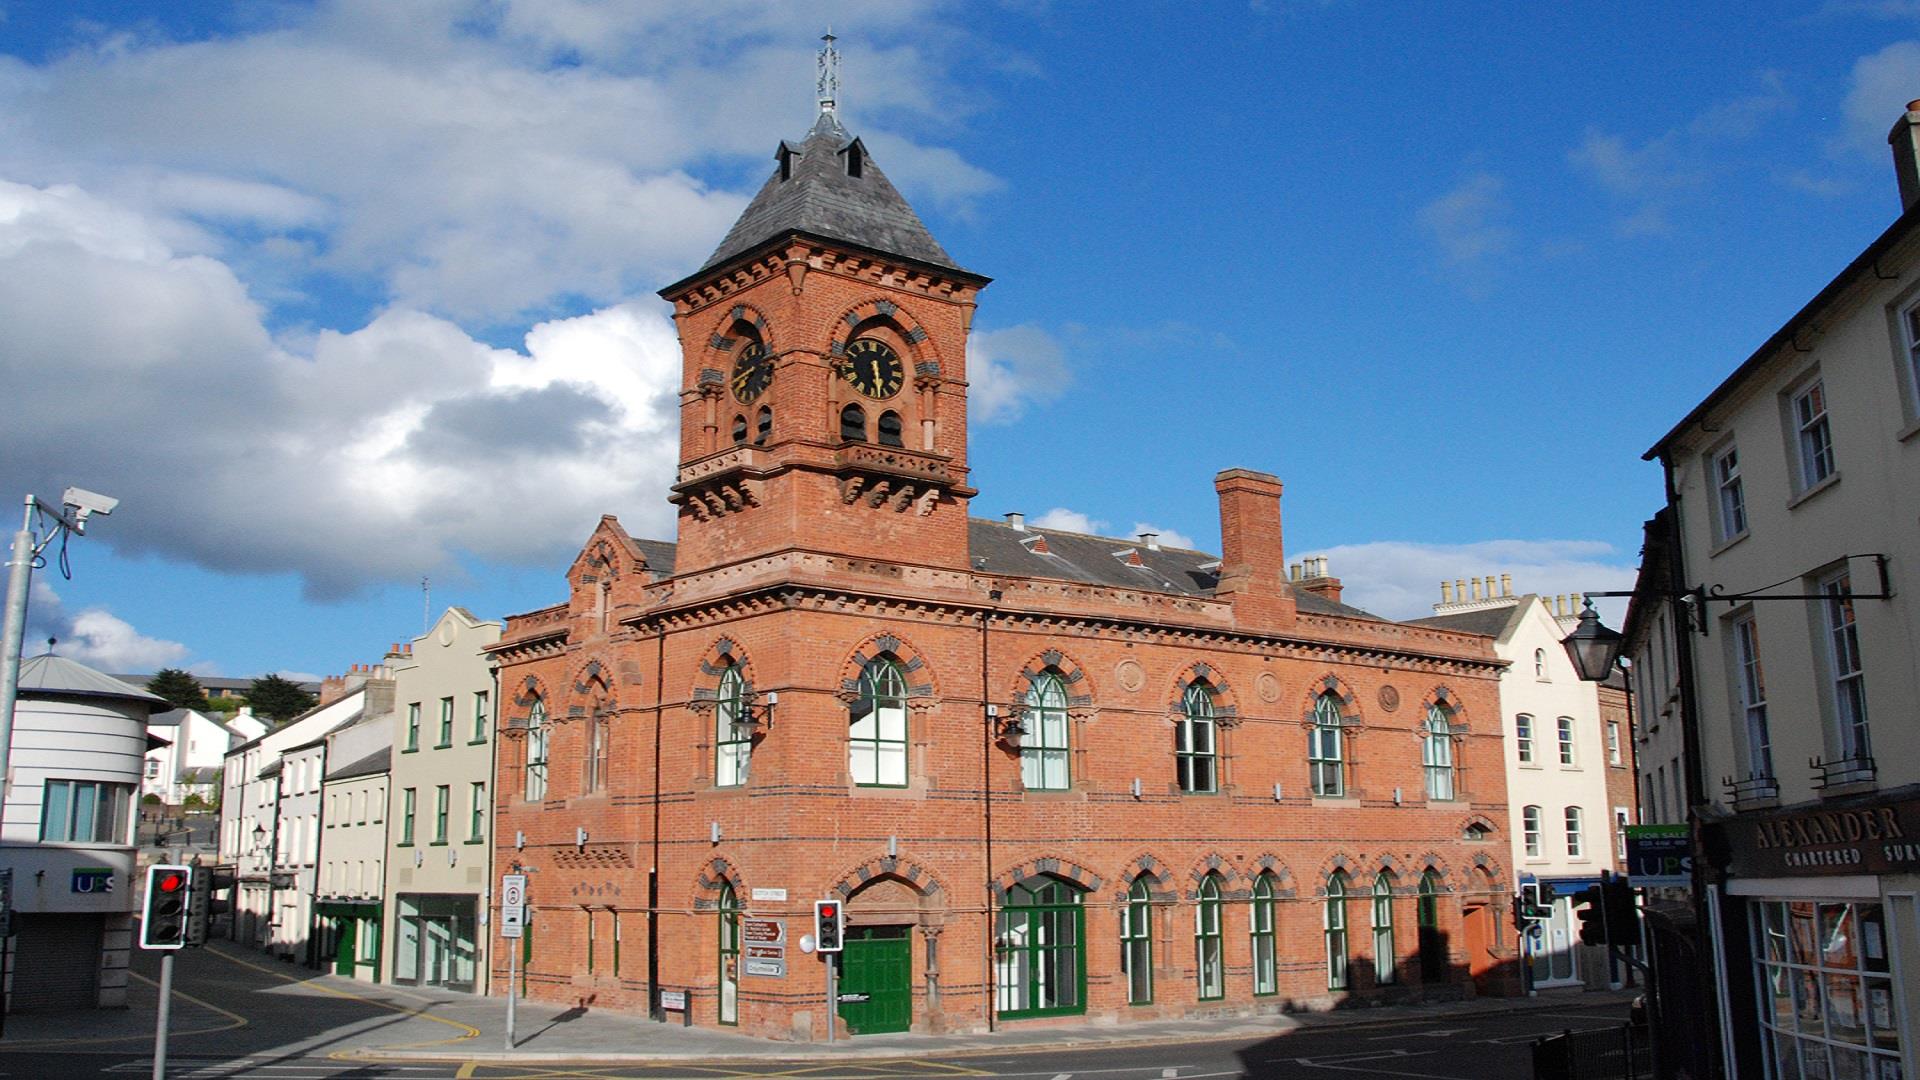 Red brick exterior with town hall clock of Down Arts Centre that sits at the junction of Irish Street, English Street and Scotch Street.